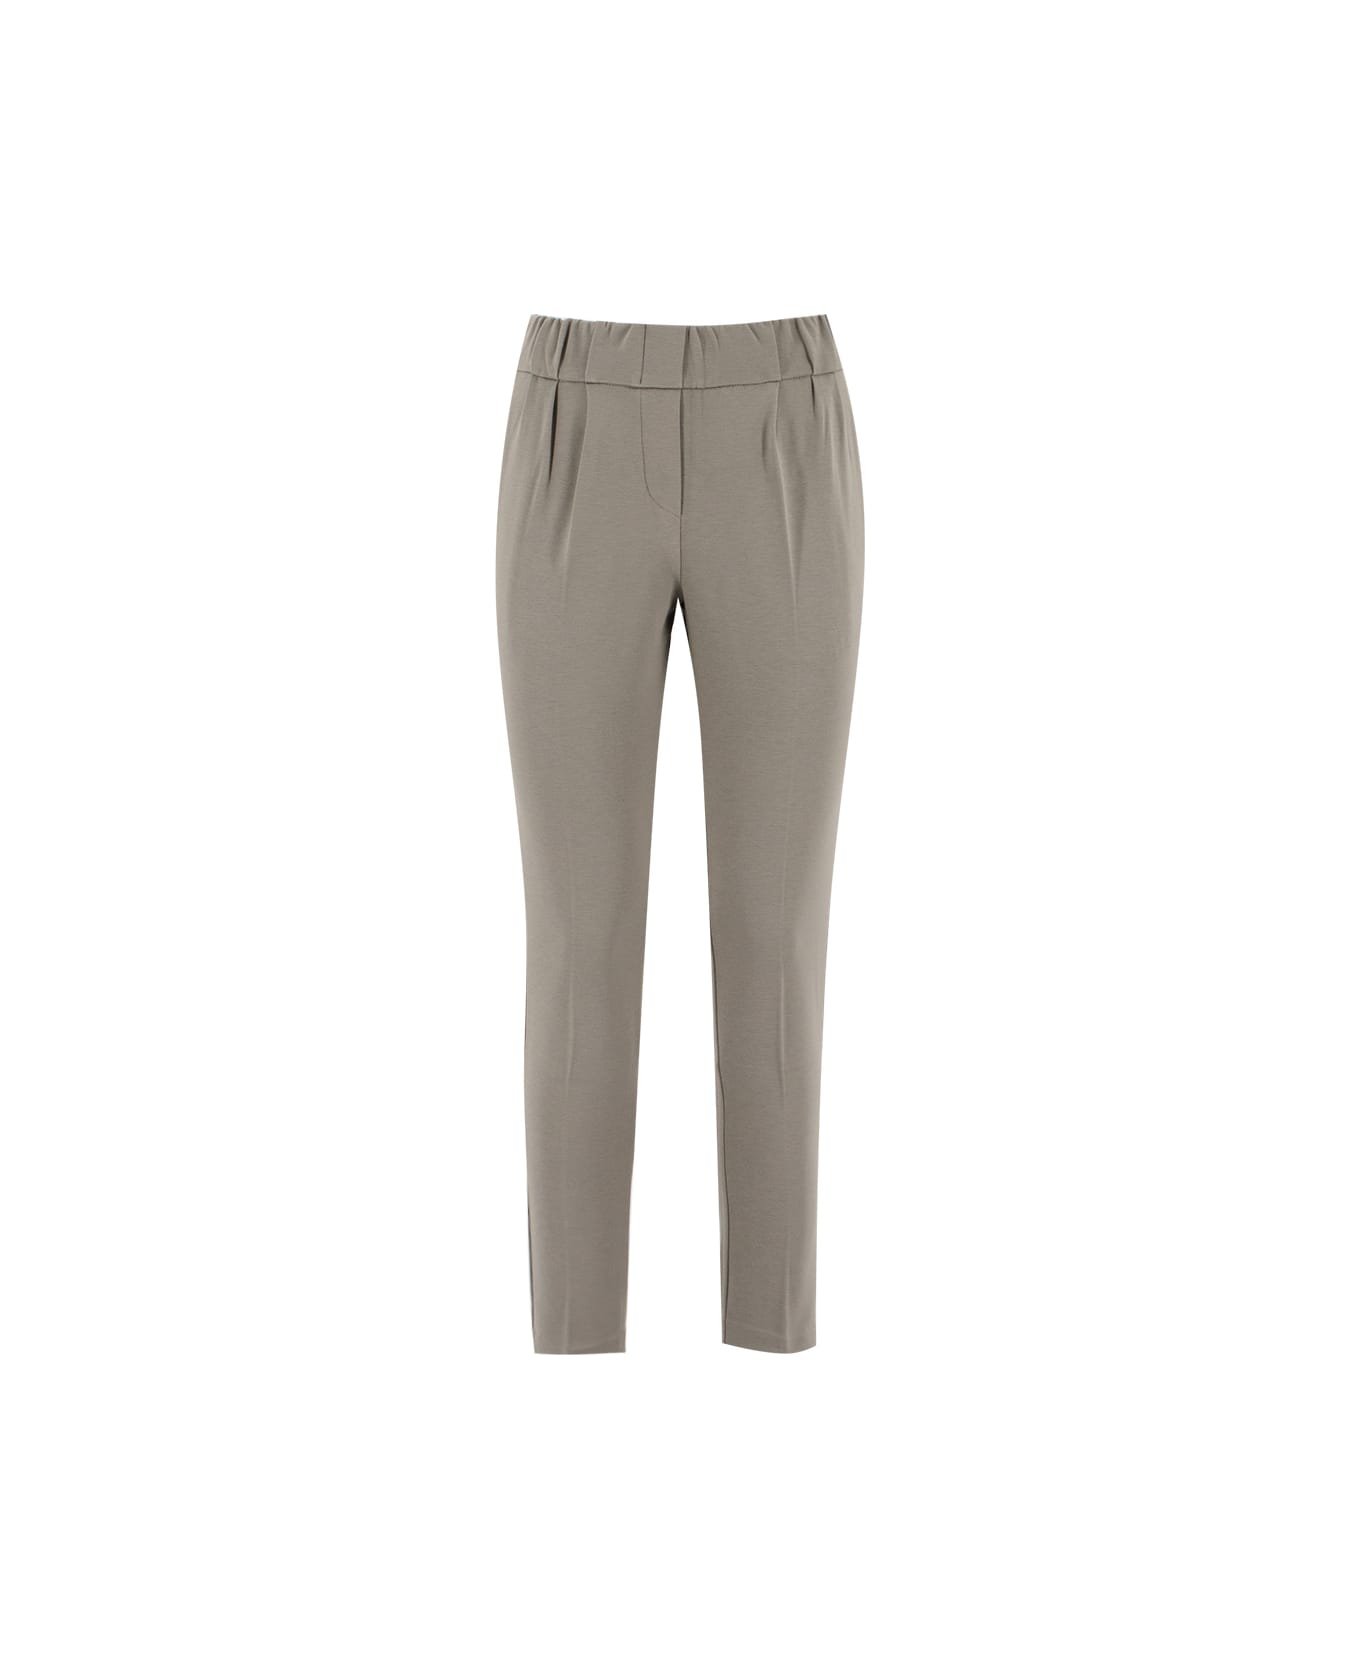 Le Tricot Perugia Trousers - MIDDLE GREY          ボトムス